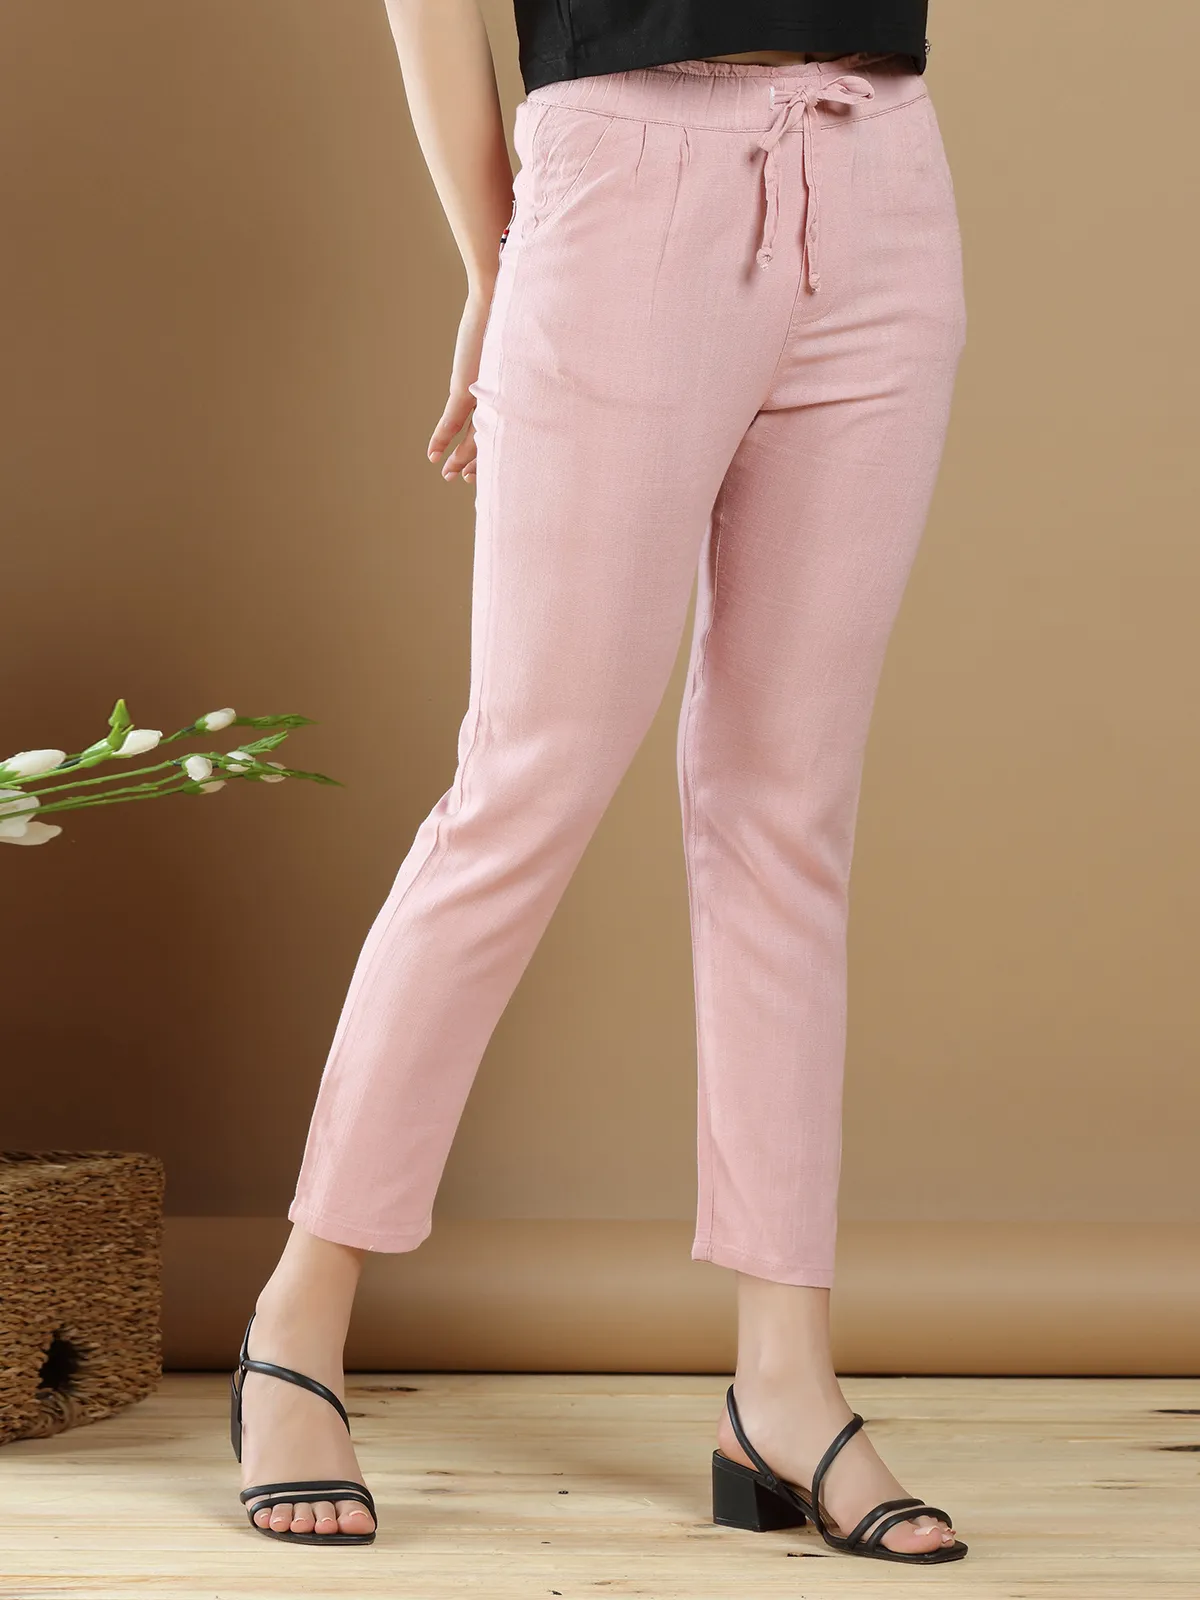 Baby pink linen plain pant for casual wear